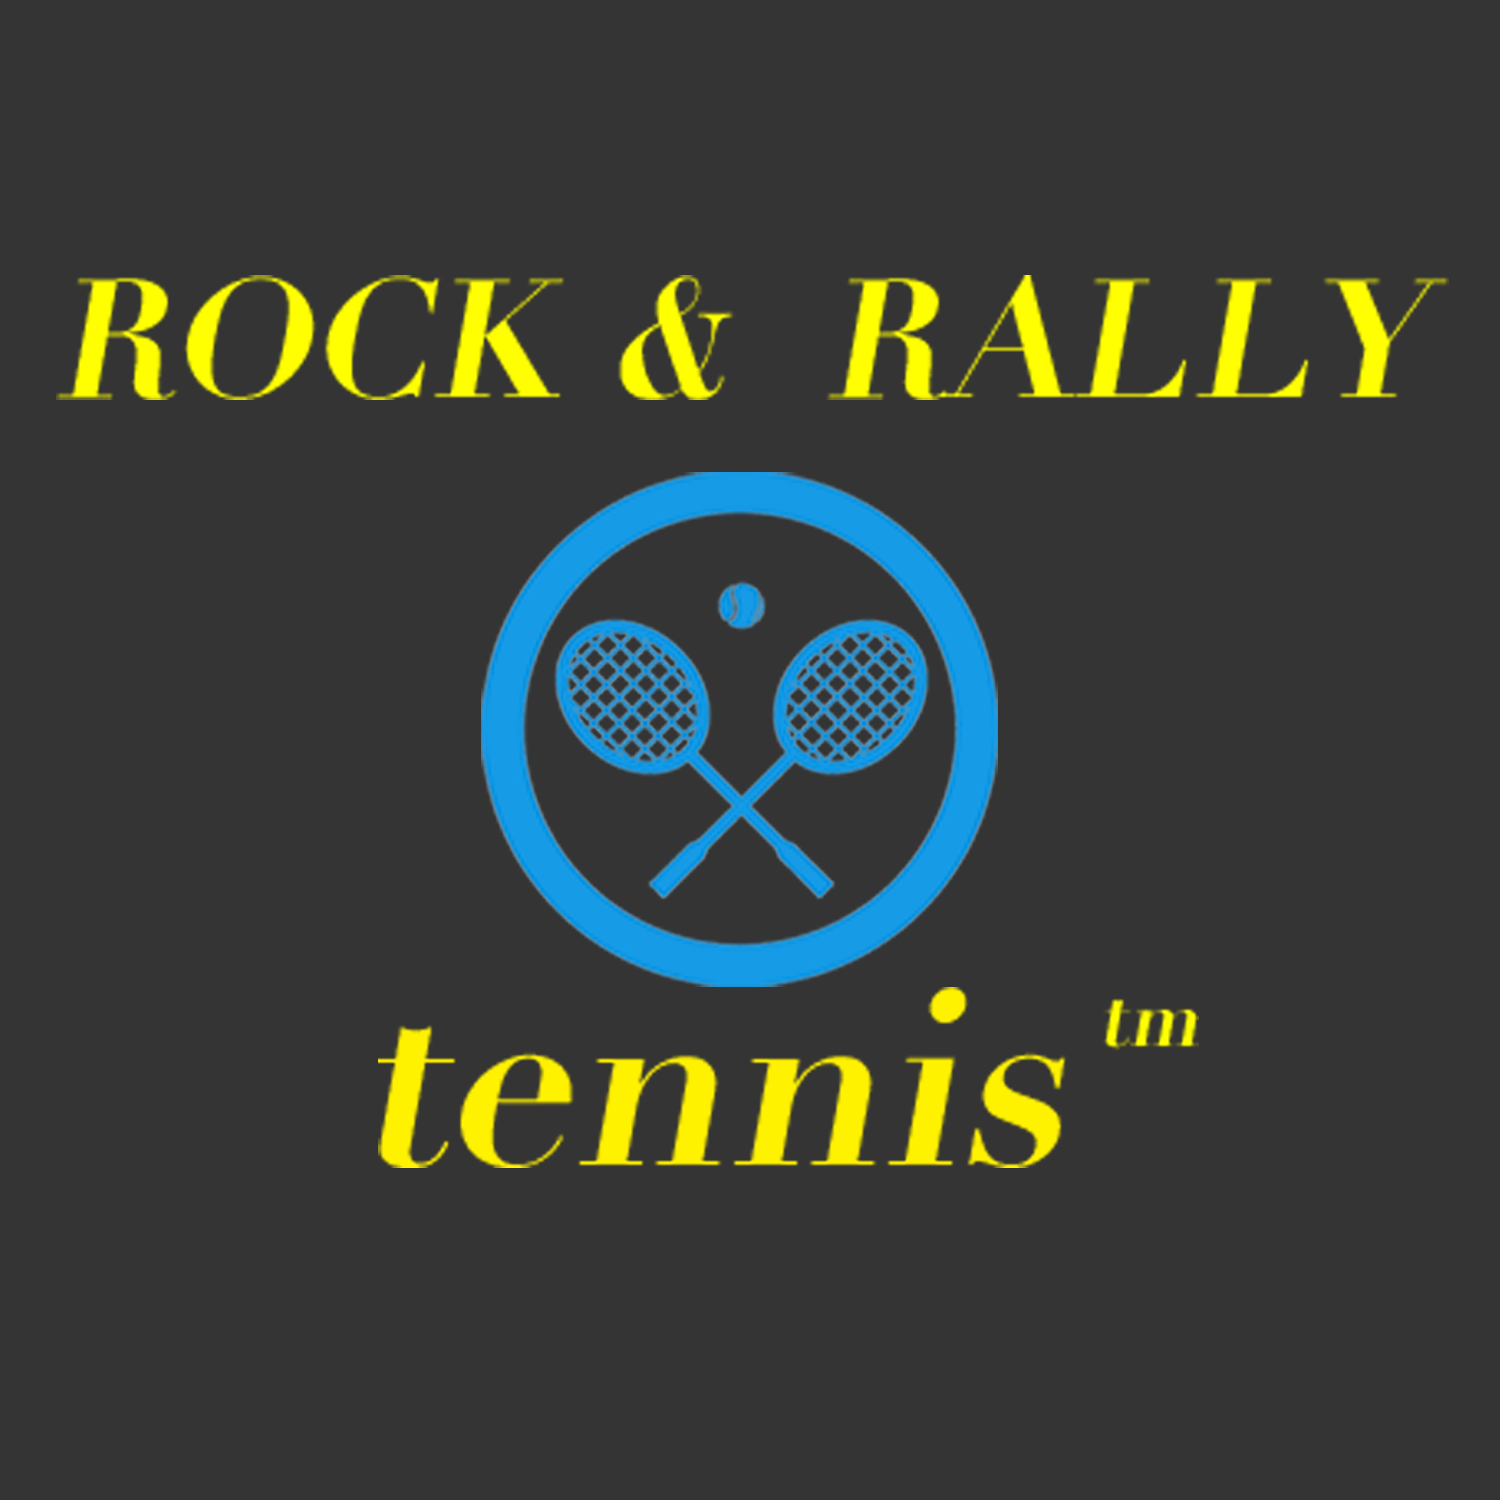 Rock & Rally Tennis Podcasts